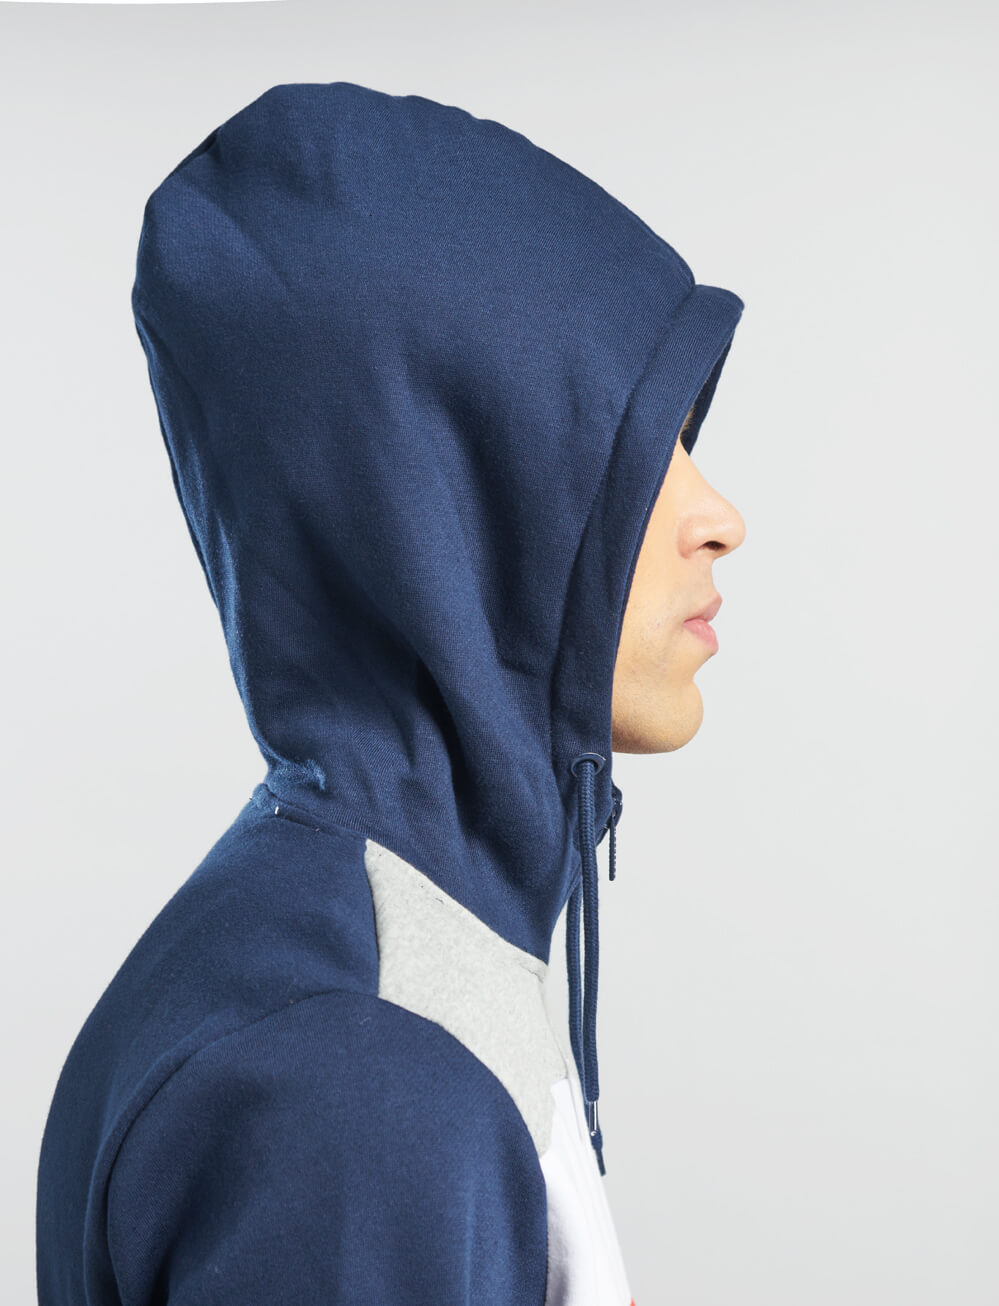 Official Arsenal Full Zip Hoodie - Navy - The World Football Store